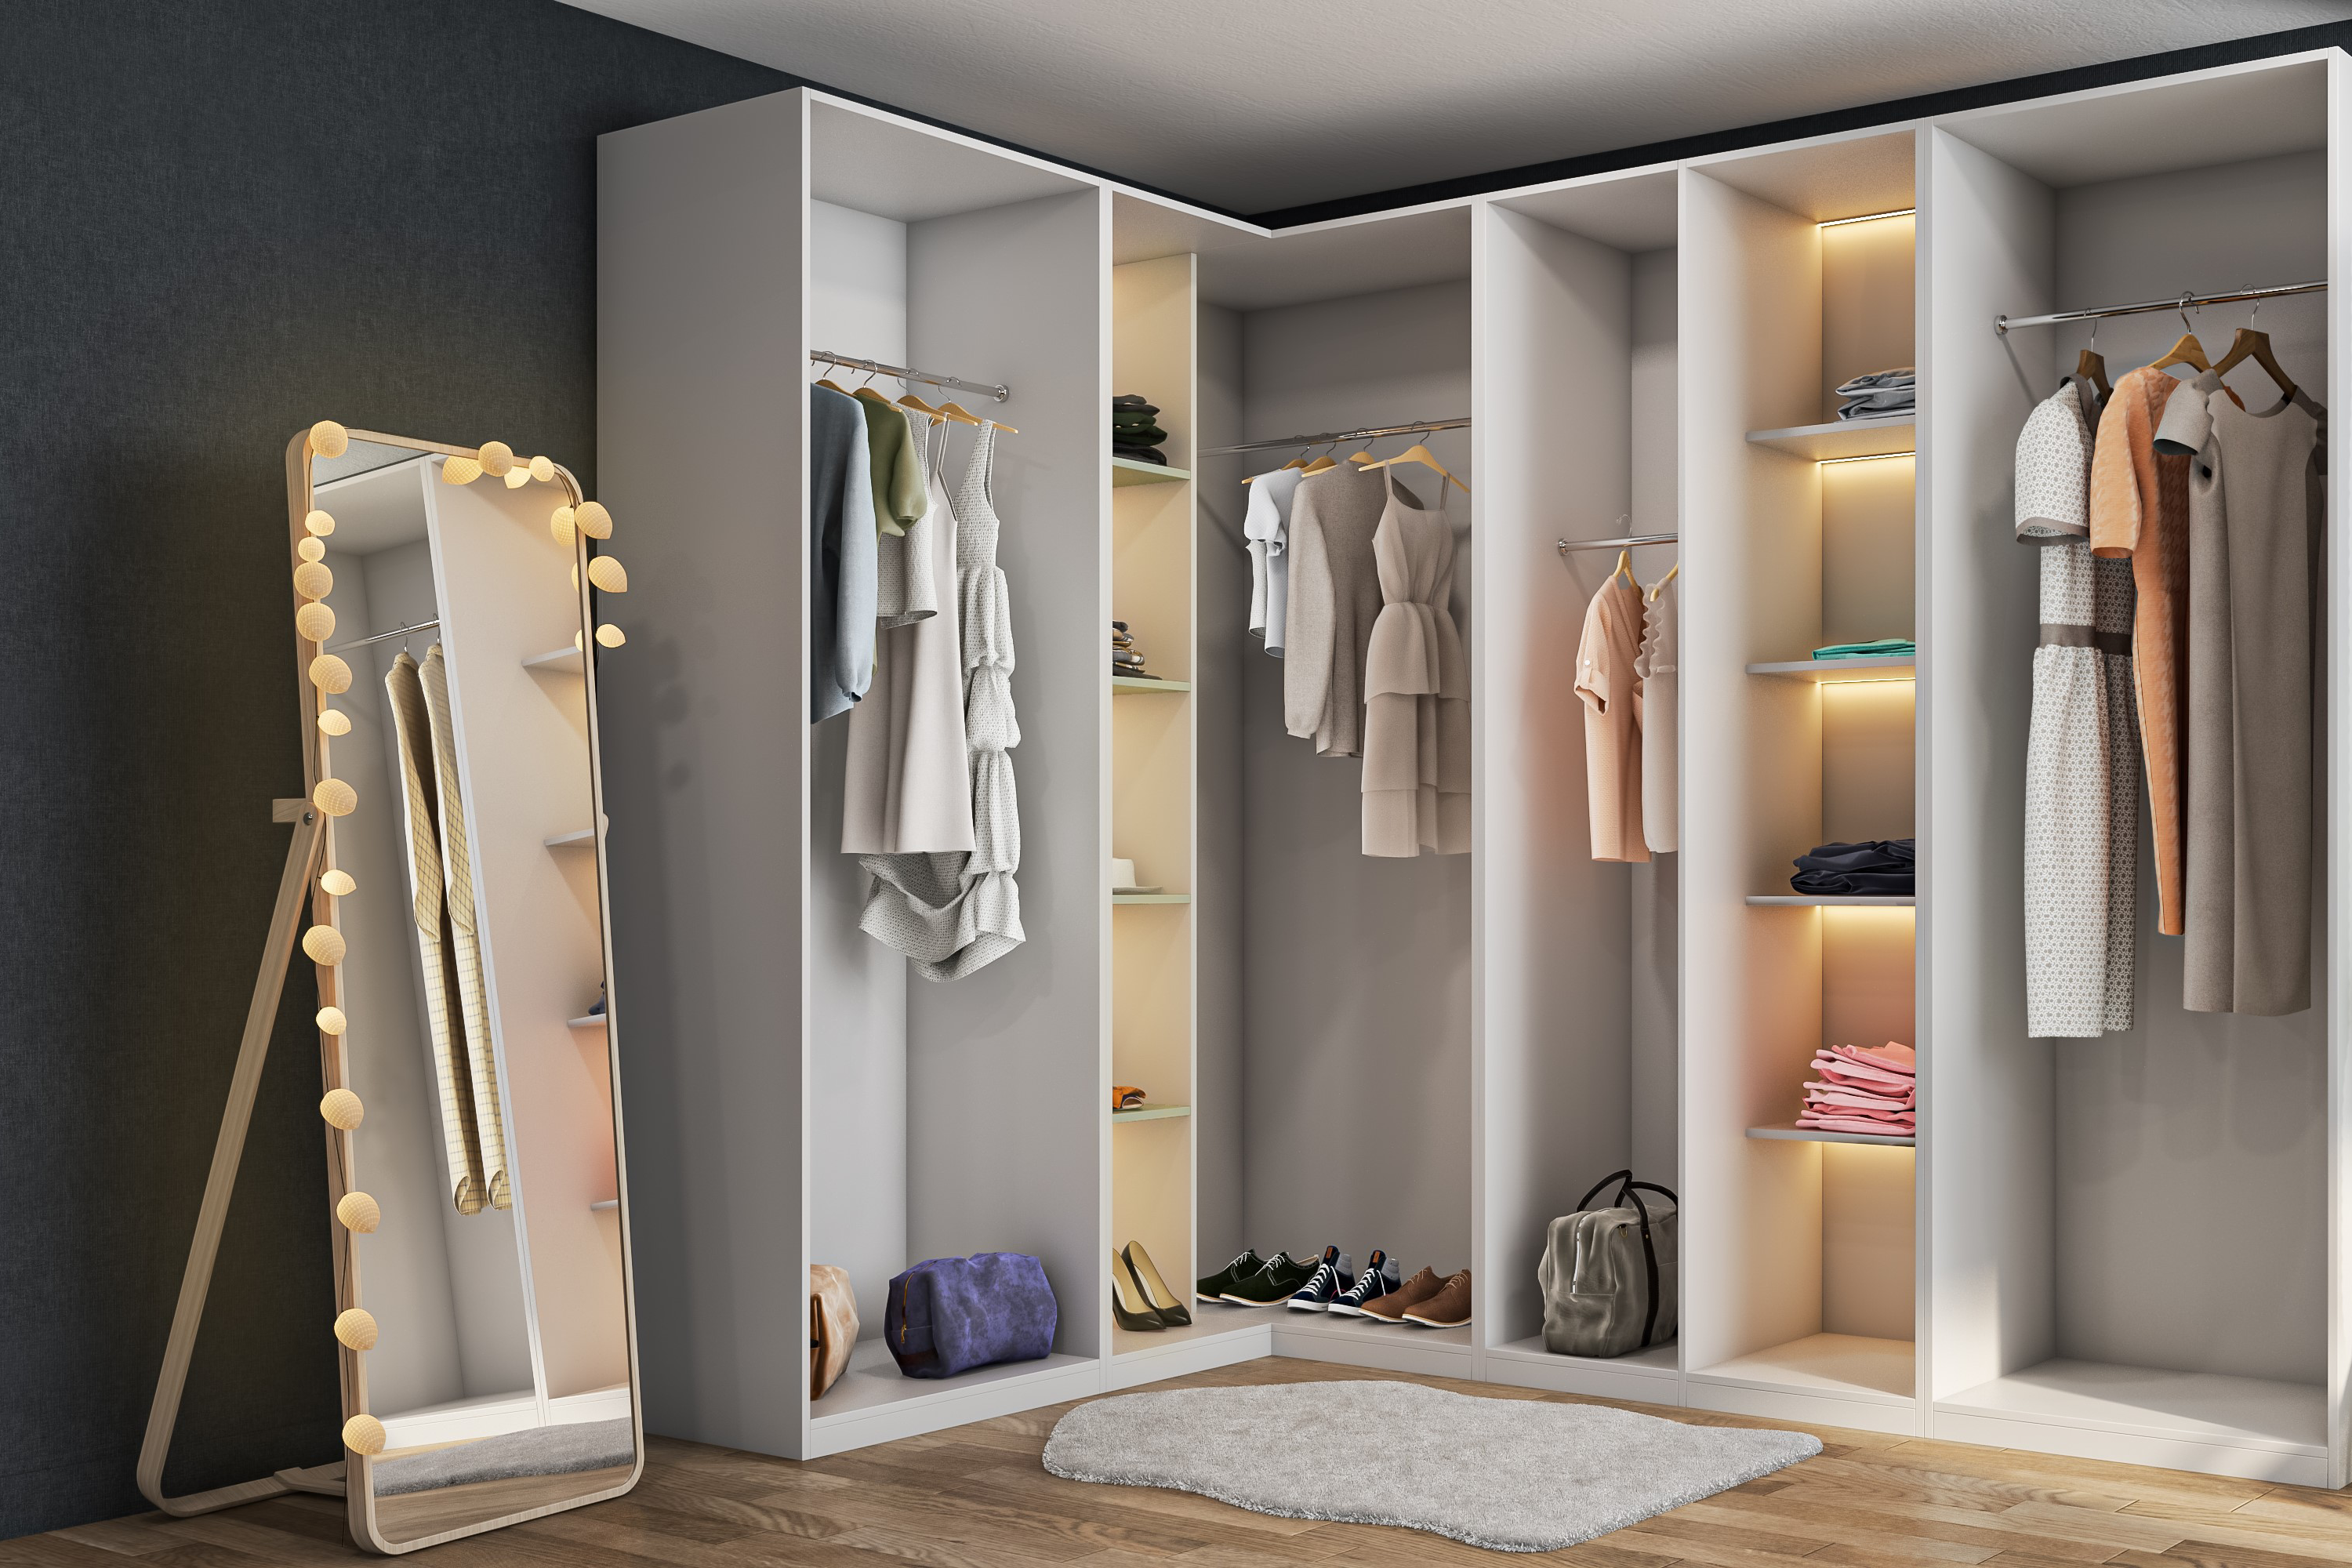 L-Shaped Modern Compact Walk-In Wardrobe Design with Shelves